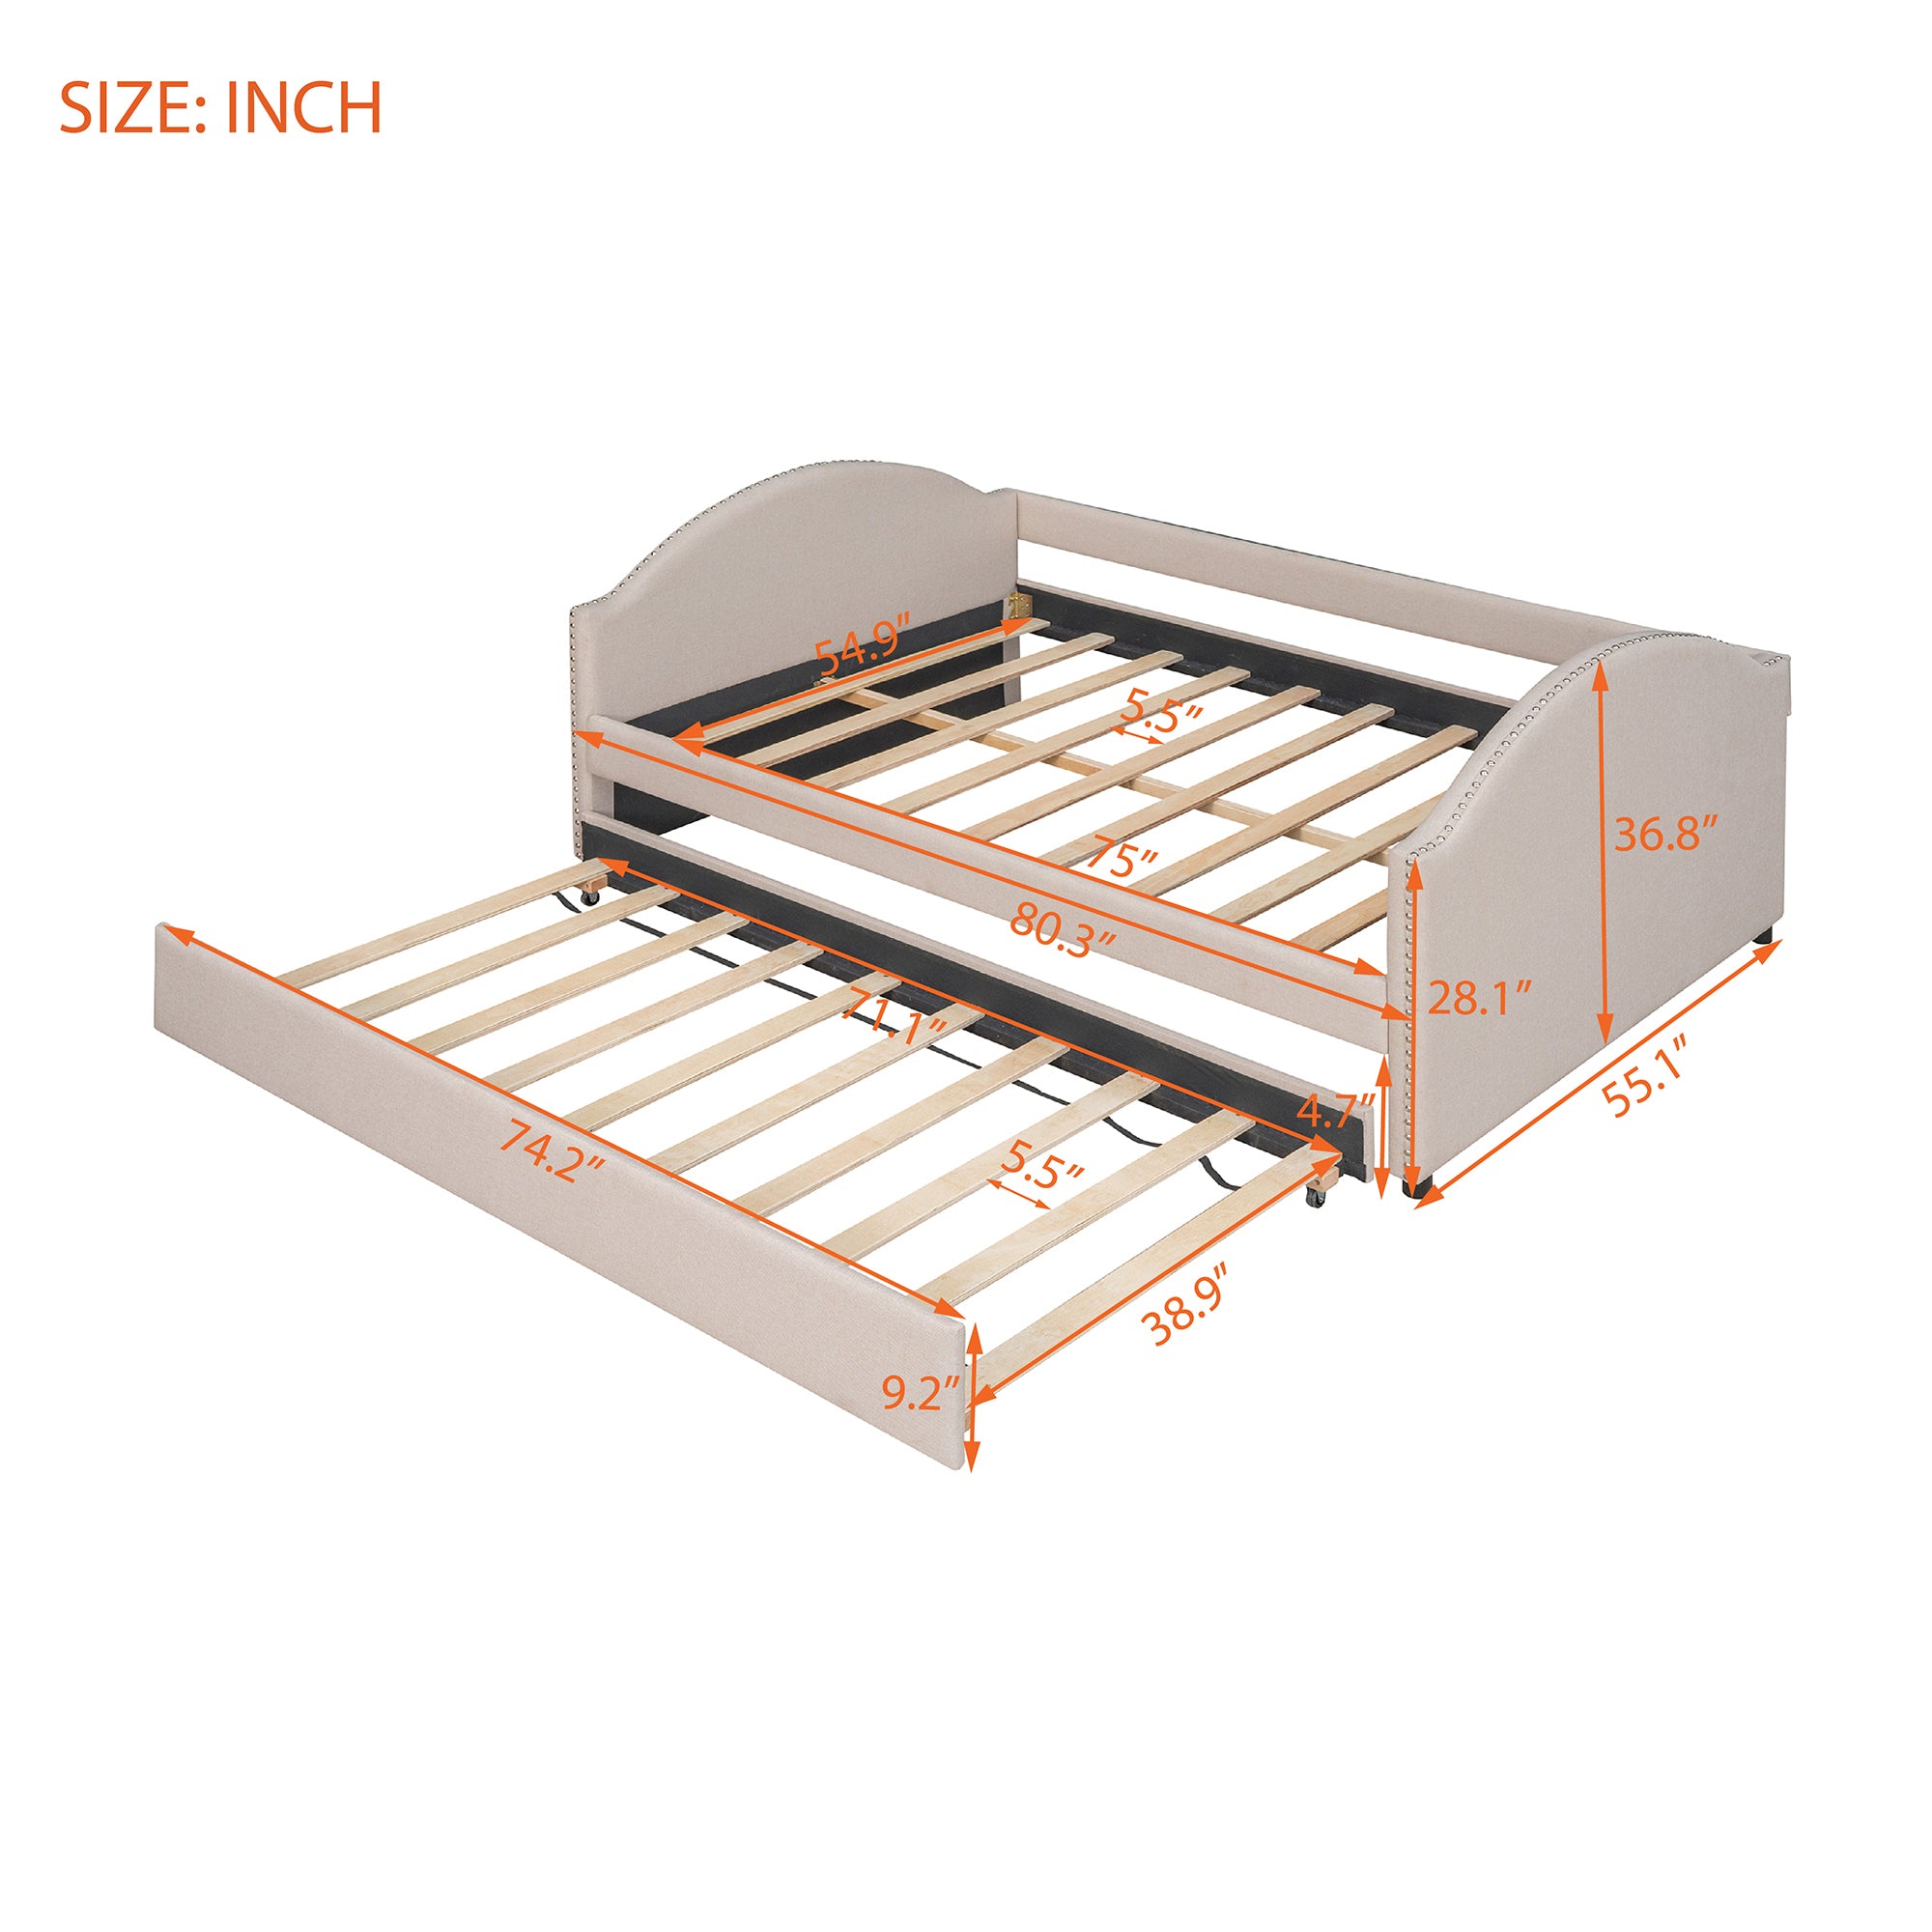 Full Daybed with Twin Size Trundle, Wood Slat Support - Beige